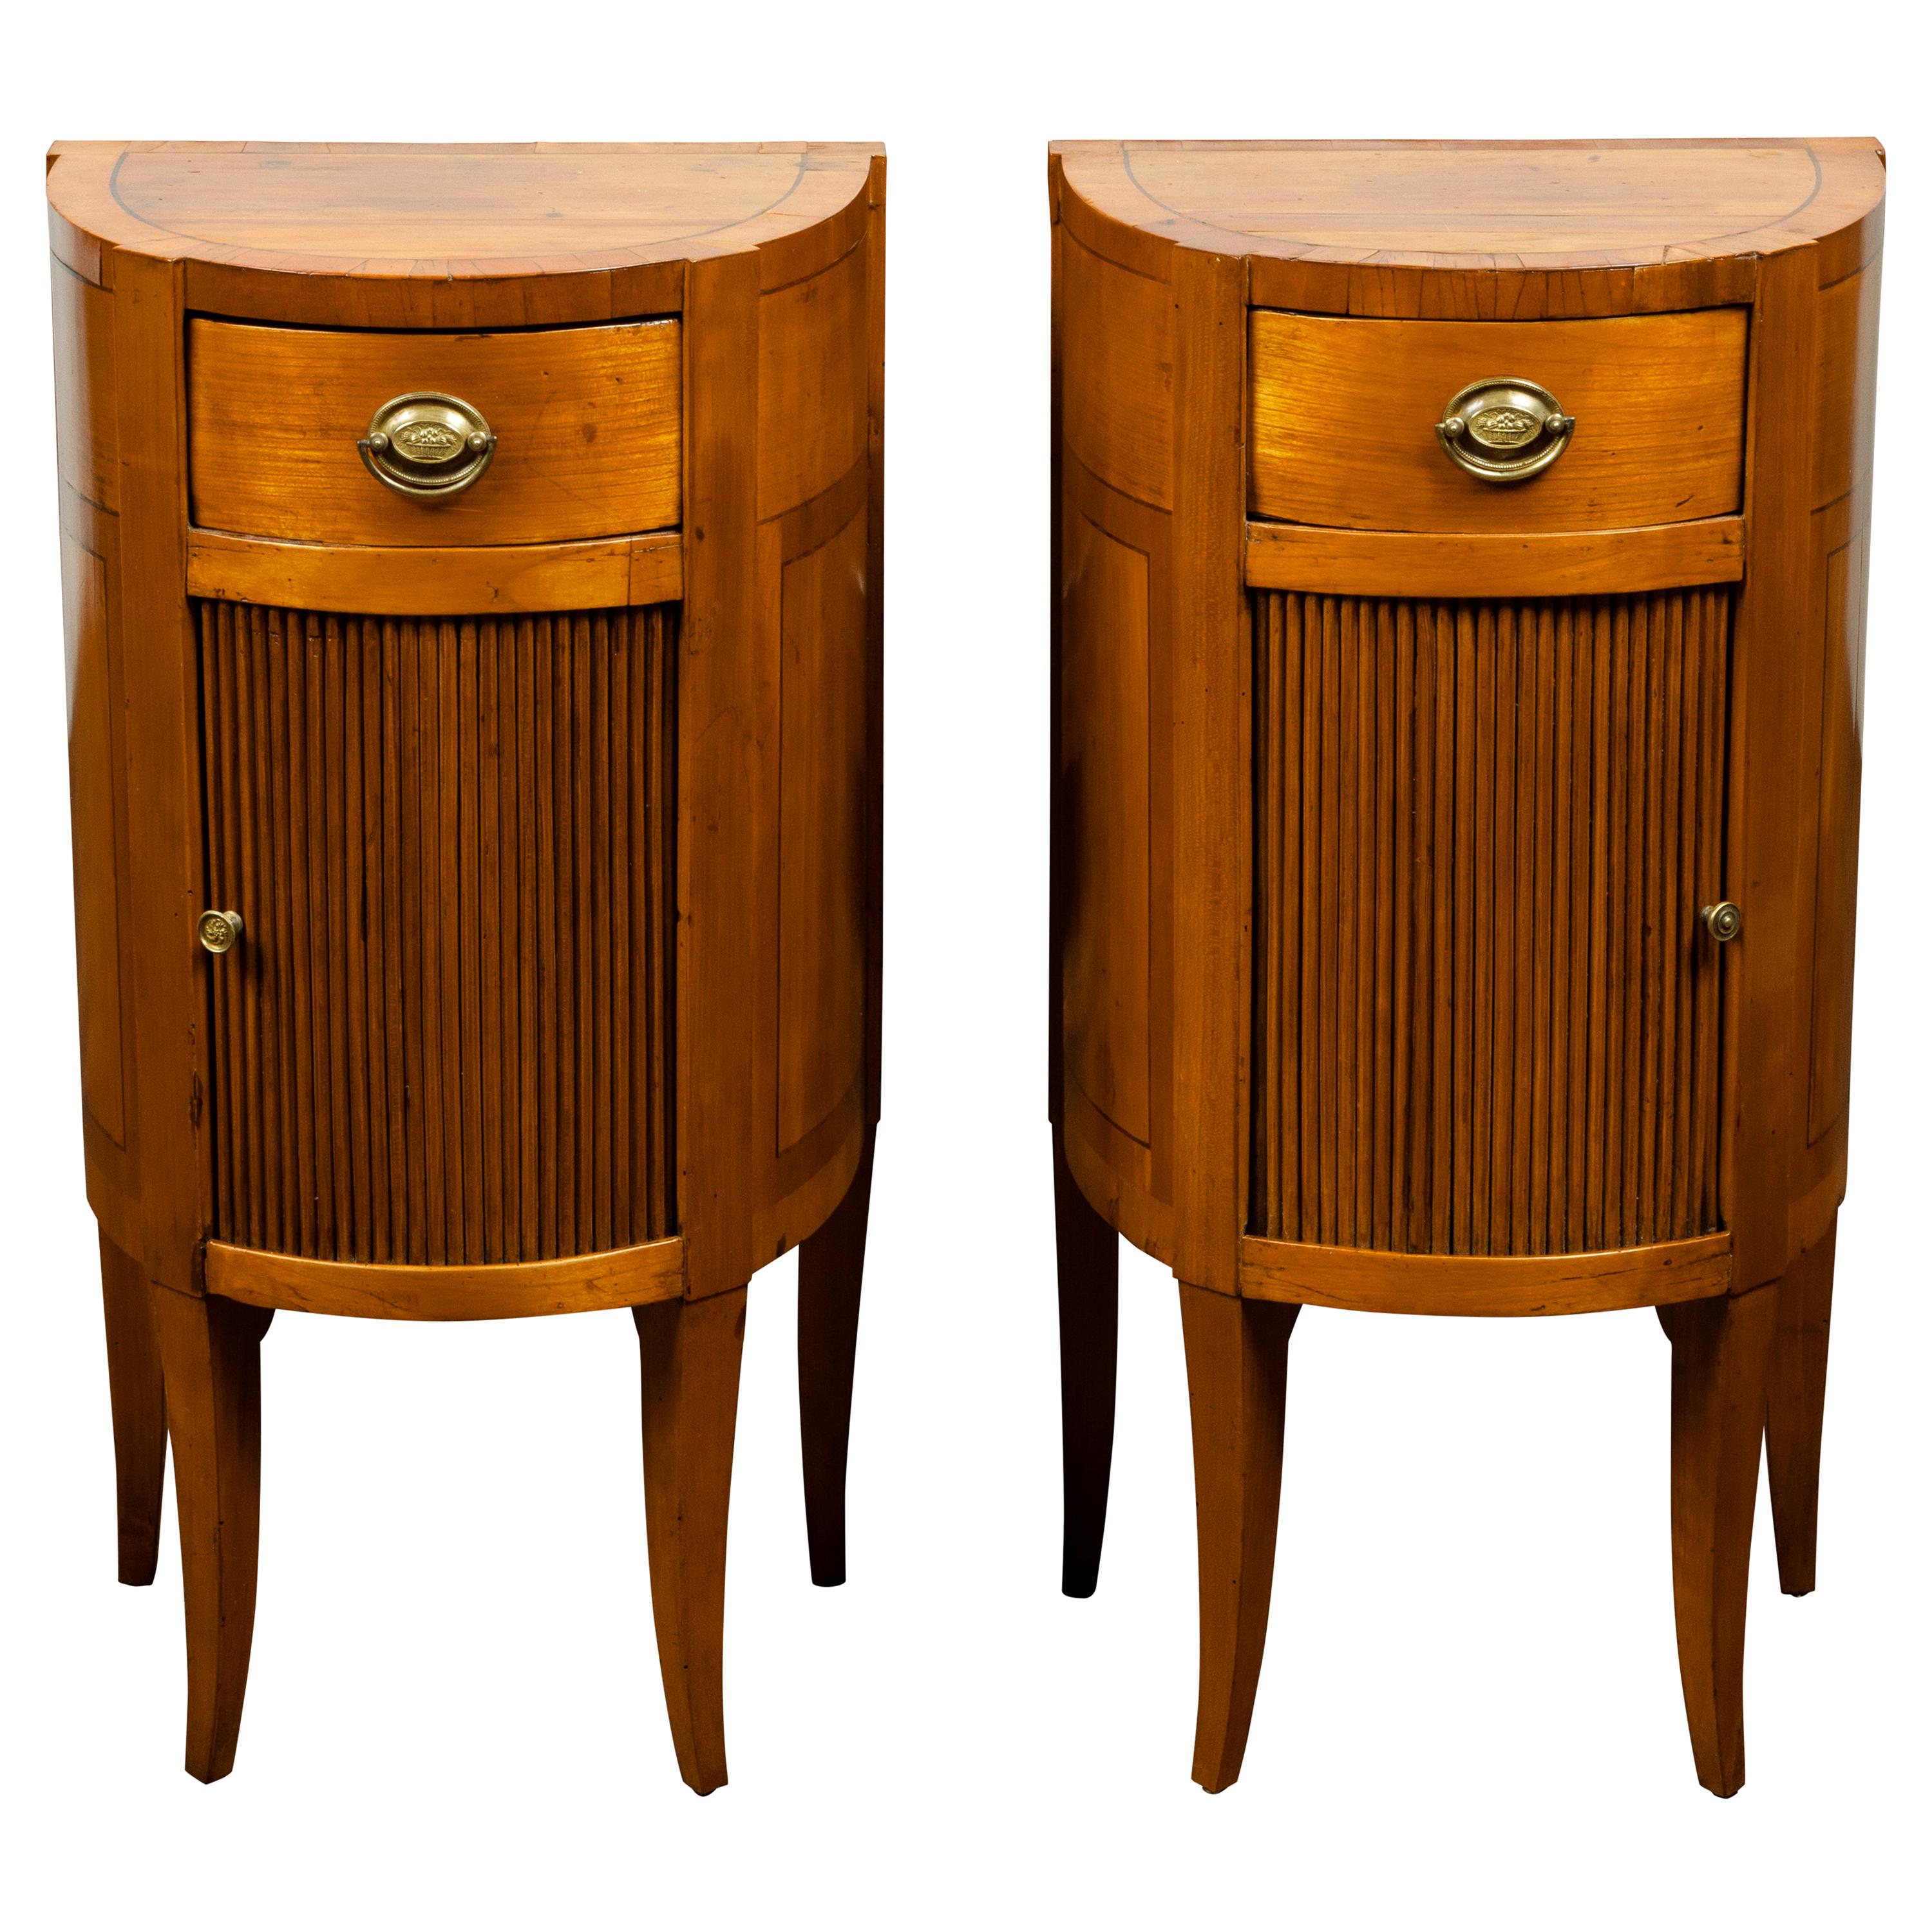 Pair of Italian 1800s Walnut Demilune Bedside Tables with Tambour Doors